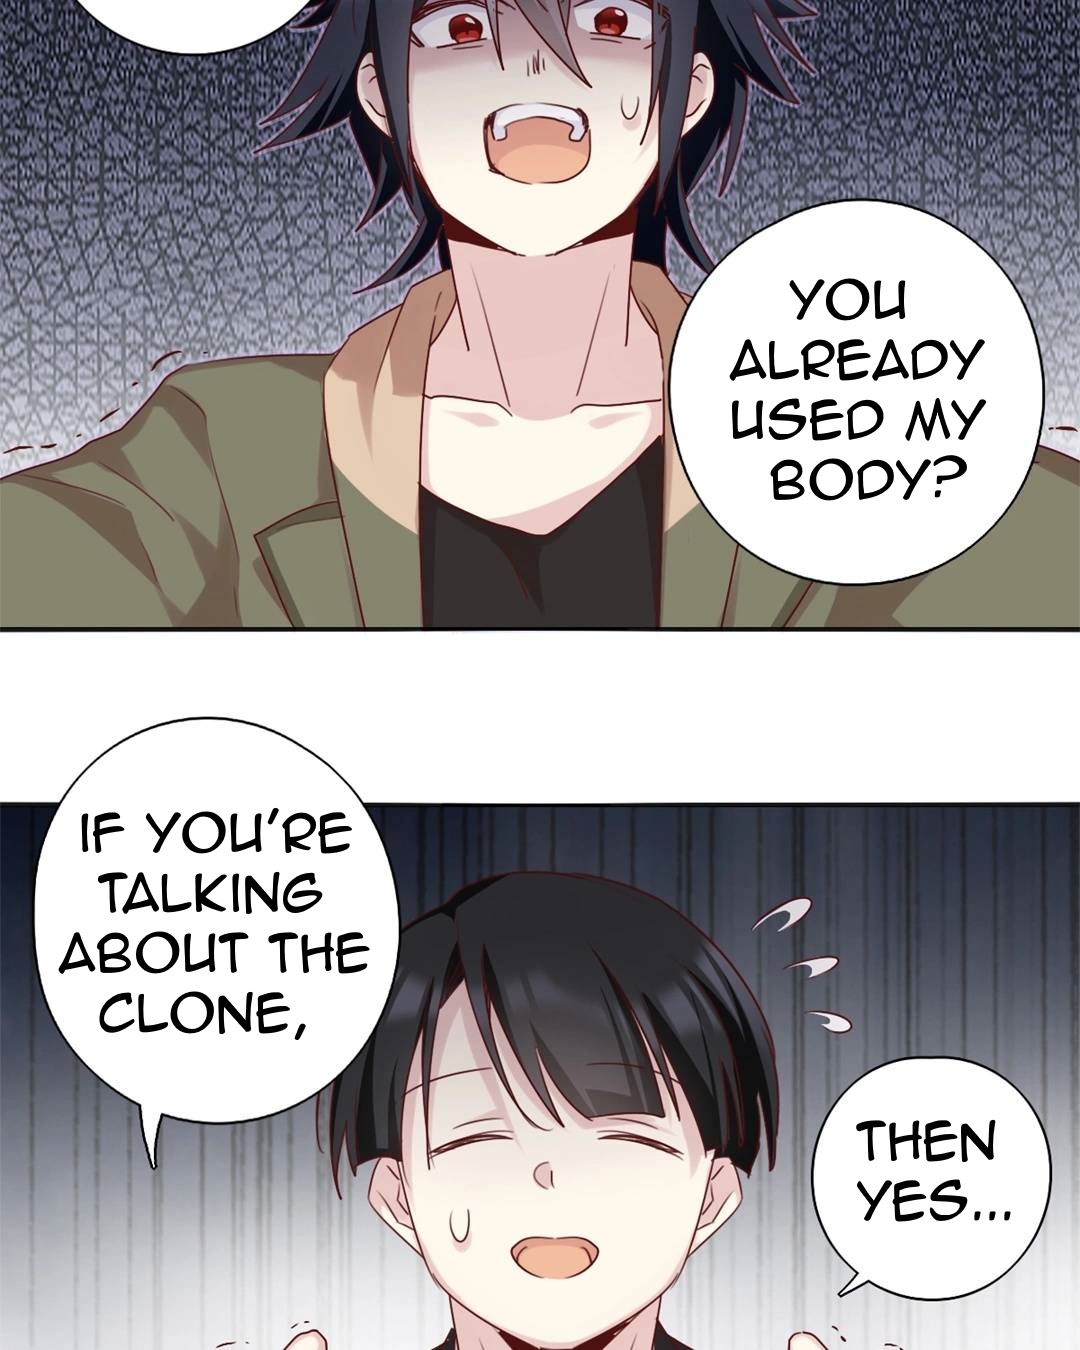 Handsome and Cute Ch. 57 Where is my body?